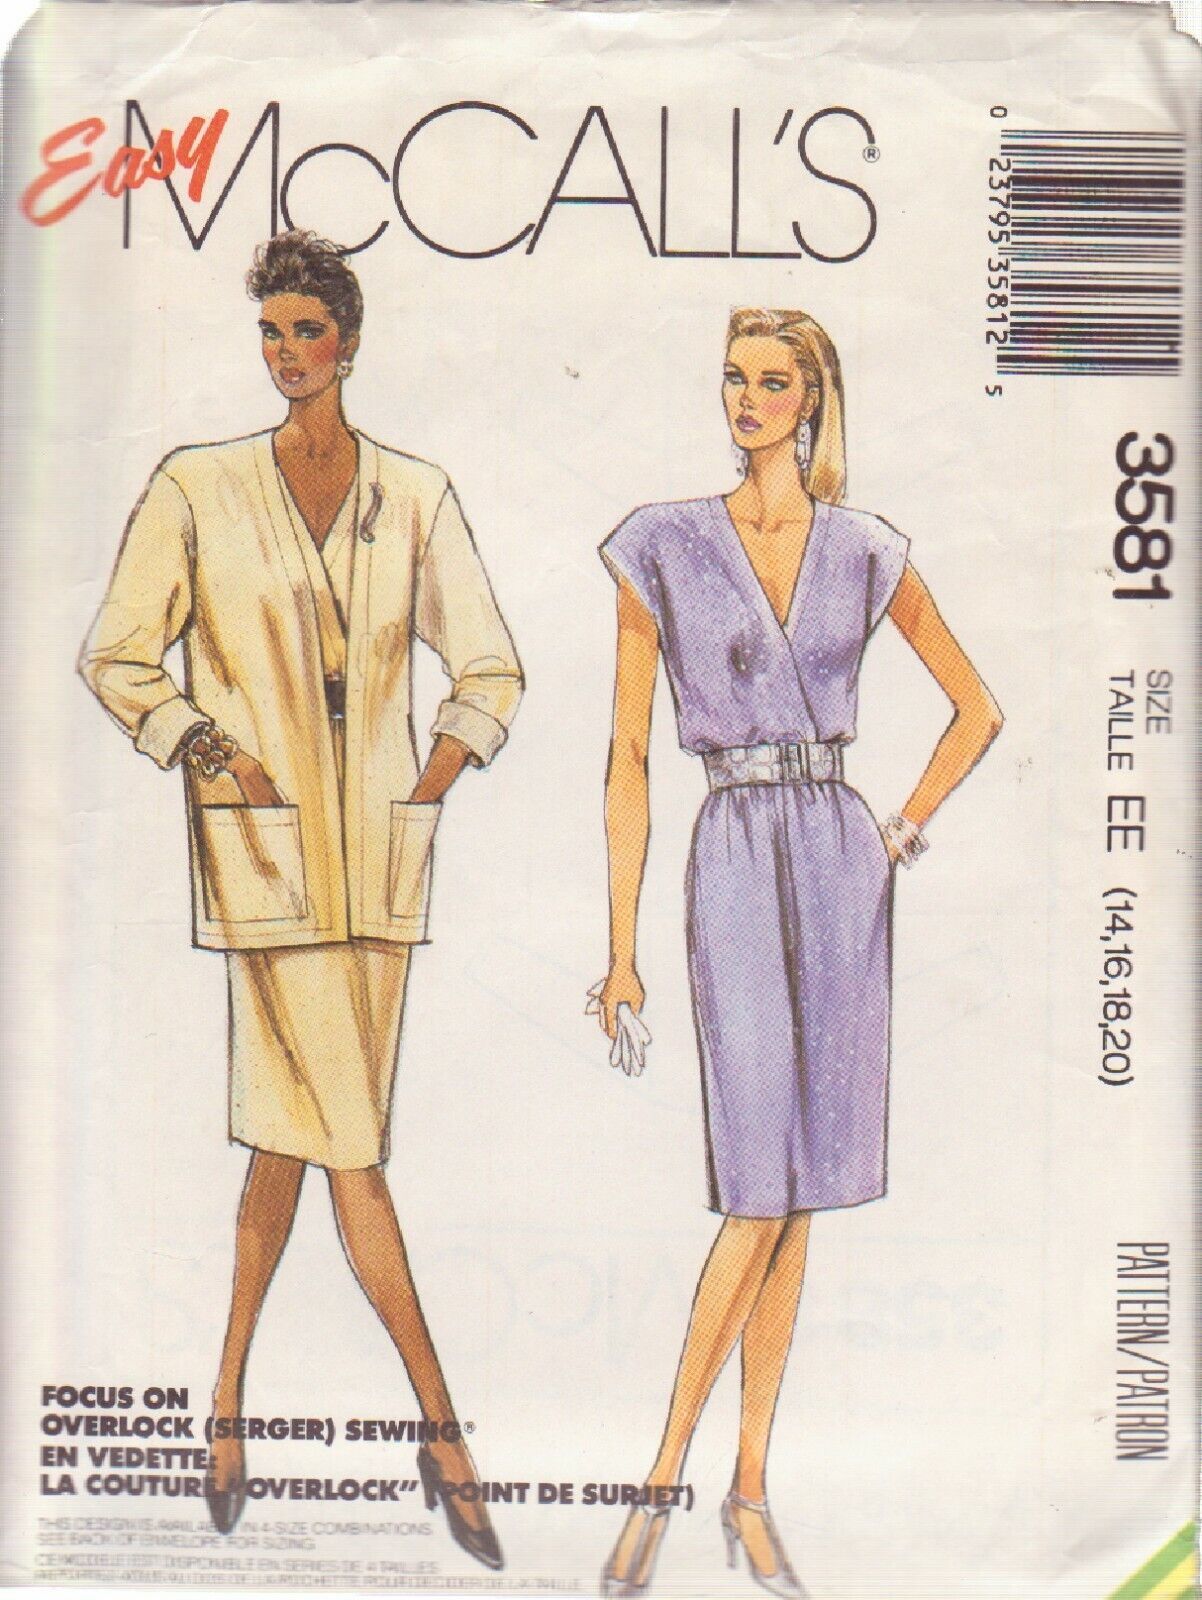 McCALL'S PATTERN 3581 SIZES 14/16/18/20 MISSES' UNLINED JACKET & DRESS - $3.00